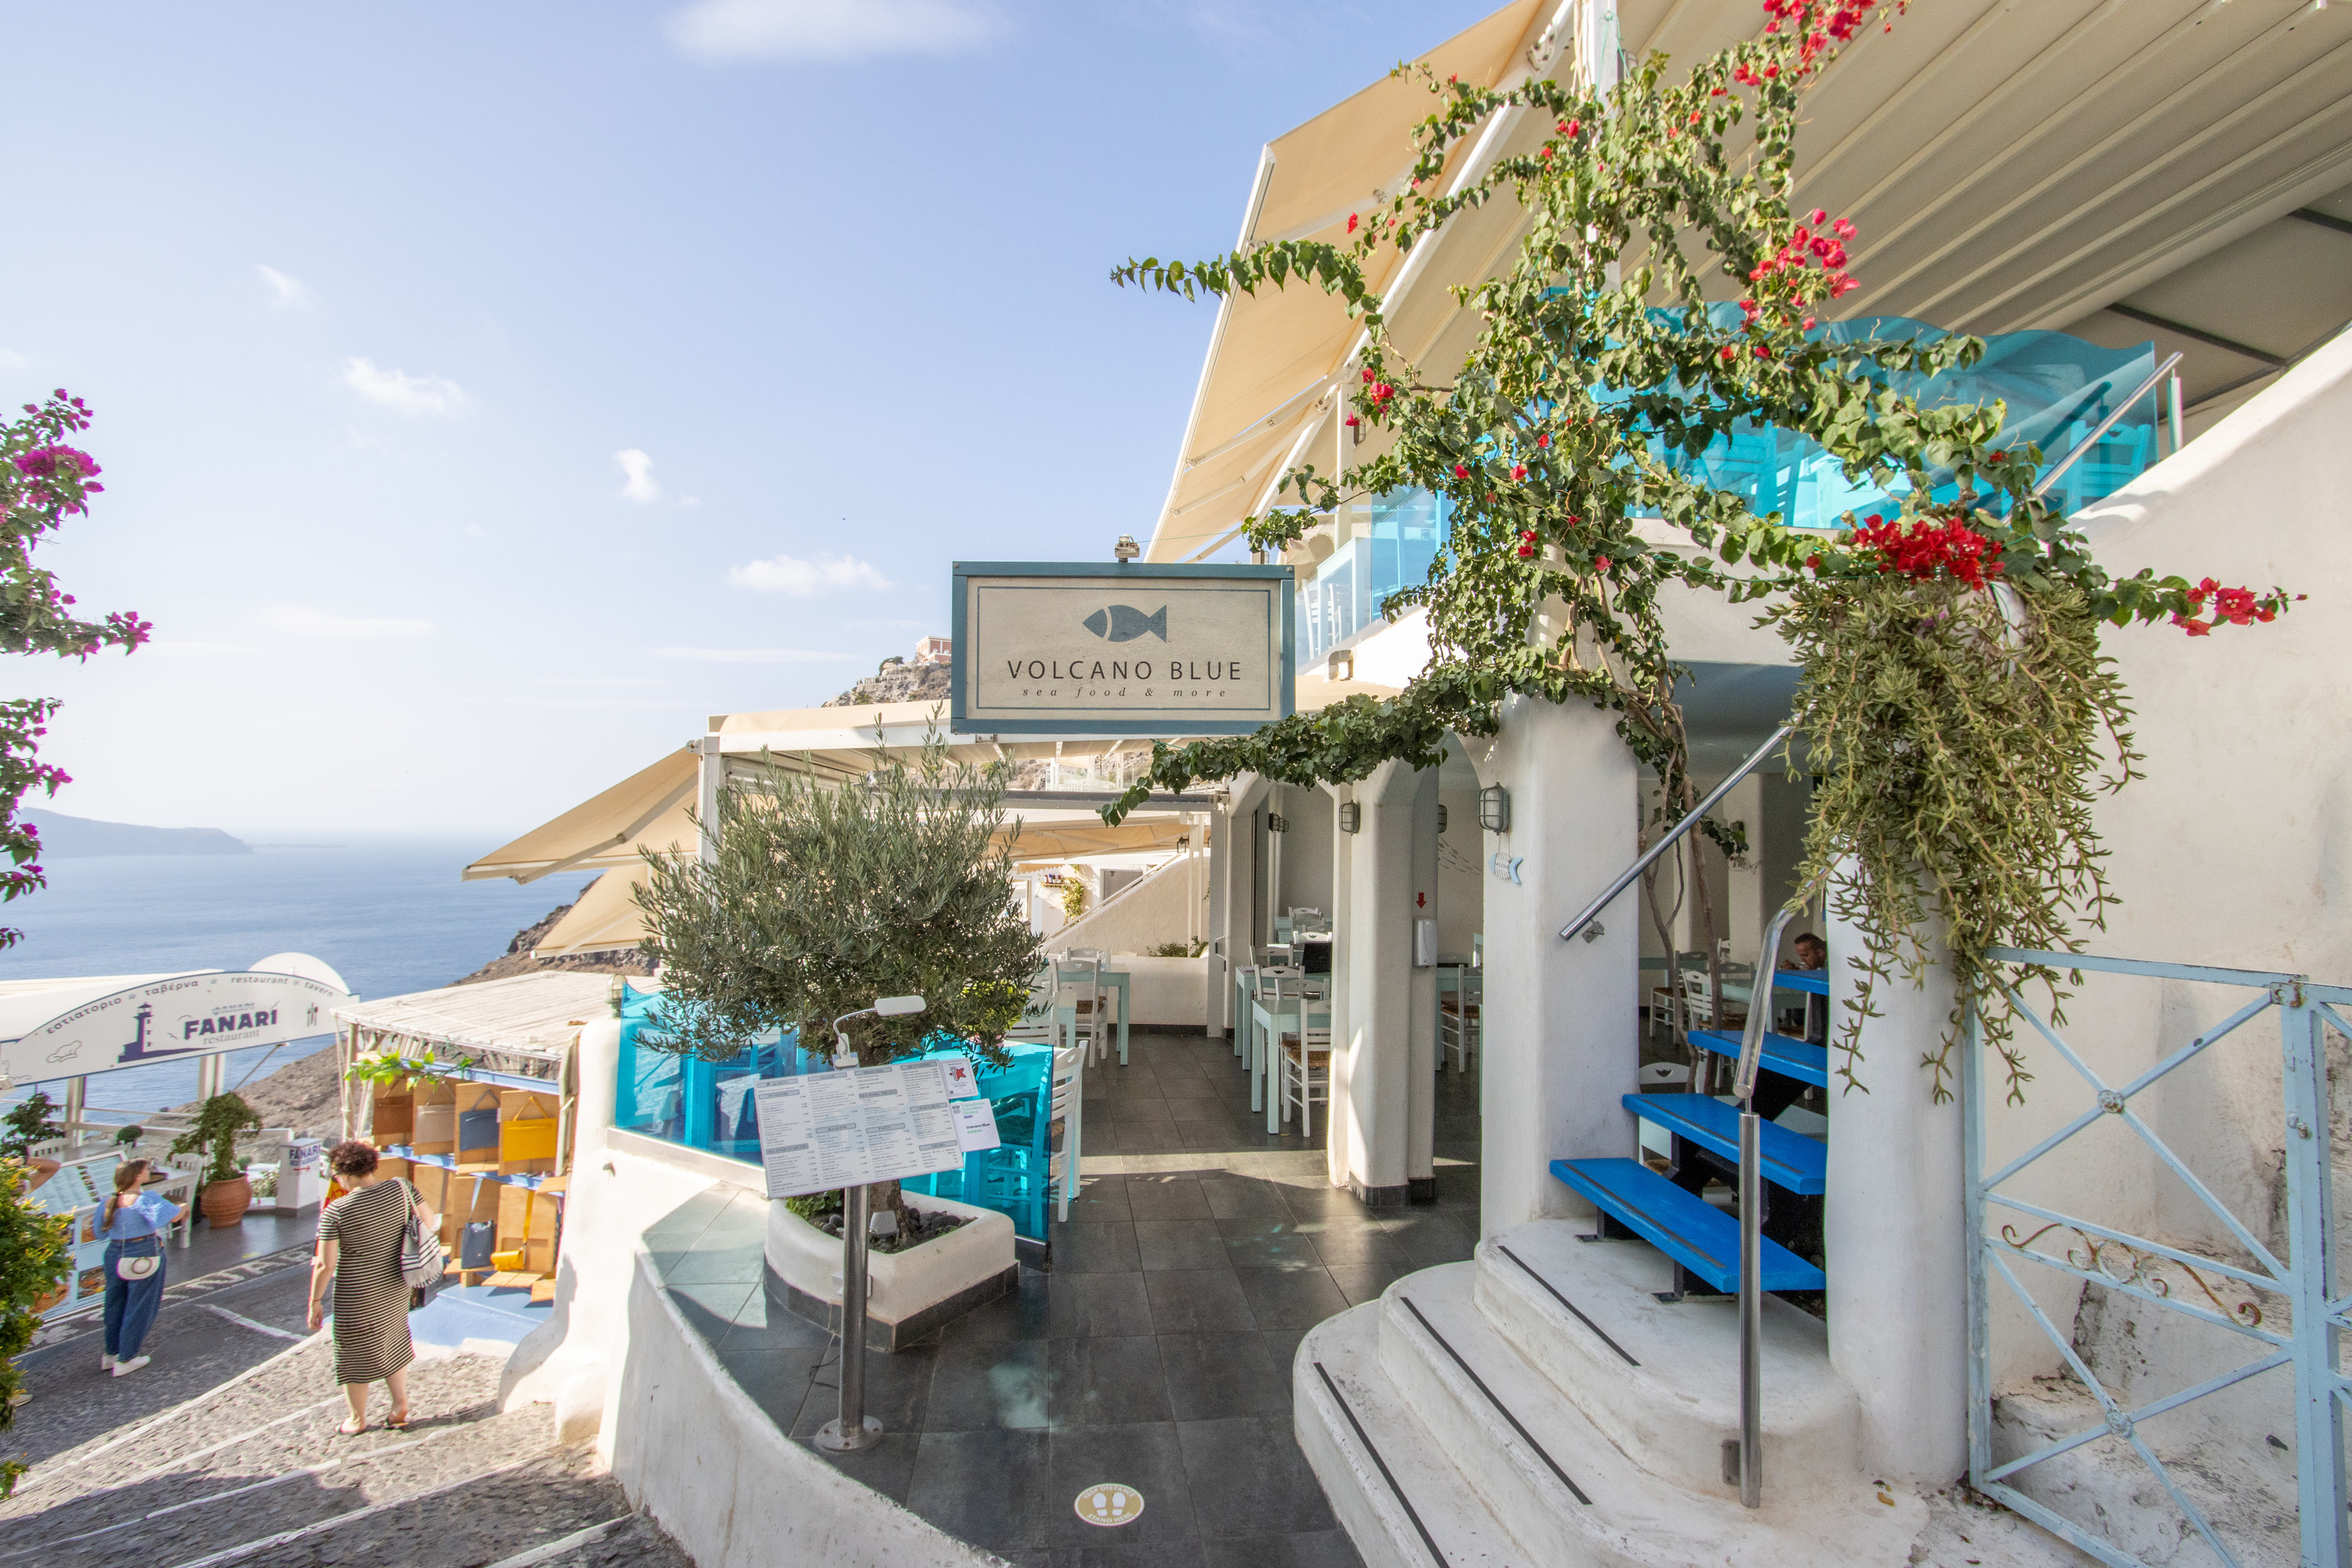 Volcano Blue Seafood Restaurant in Firá on Santorini in South Aegean Islands, Greece, with tourists in the background